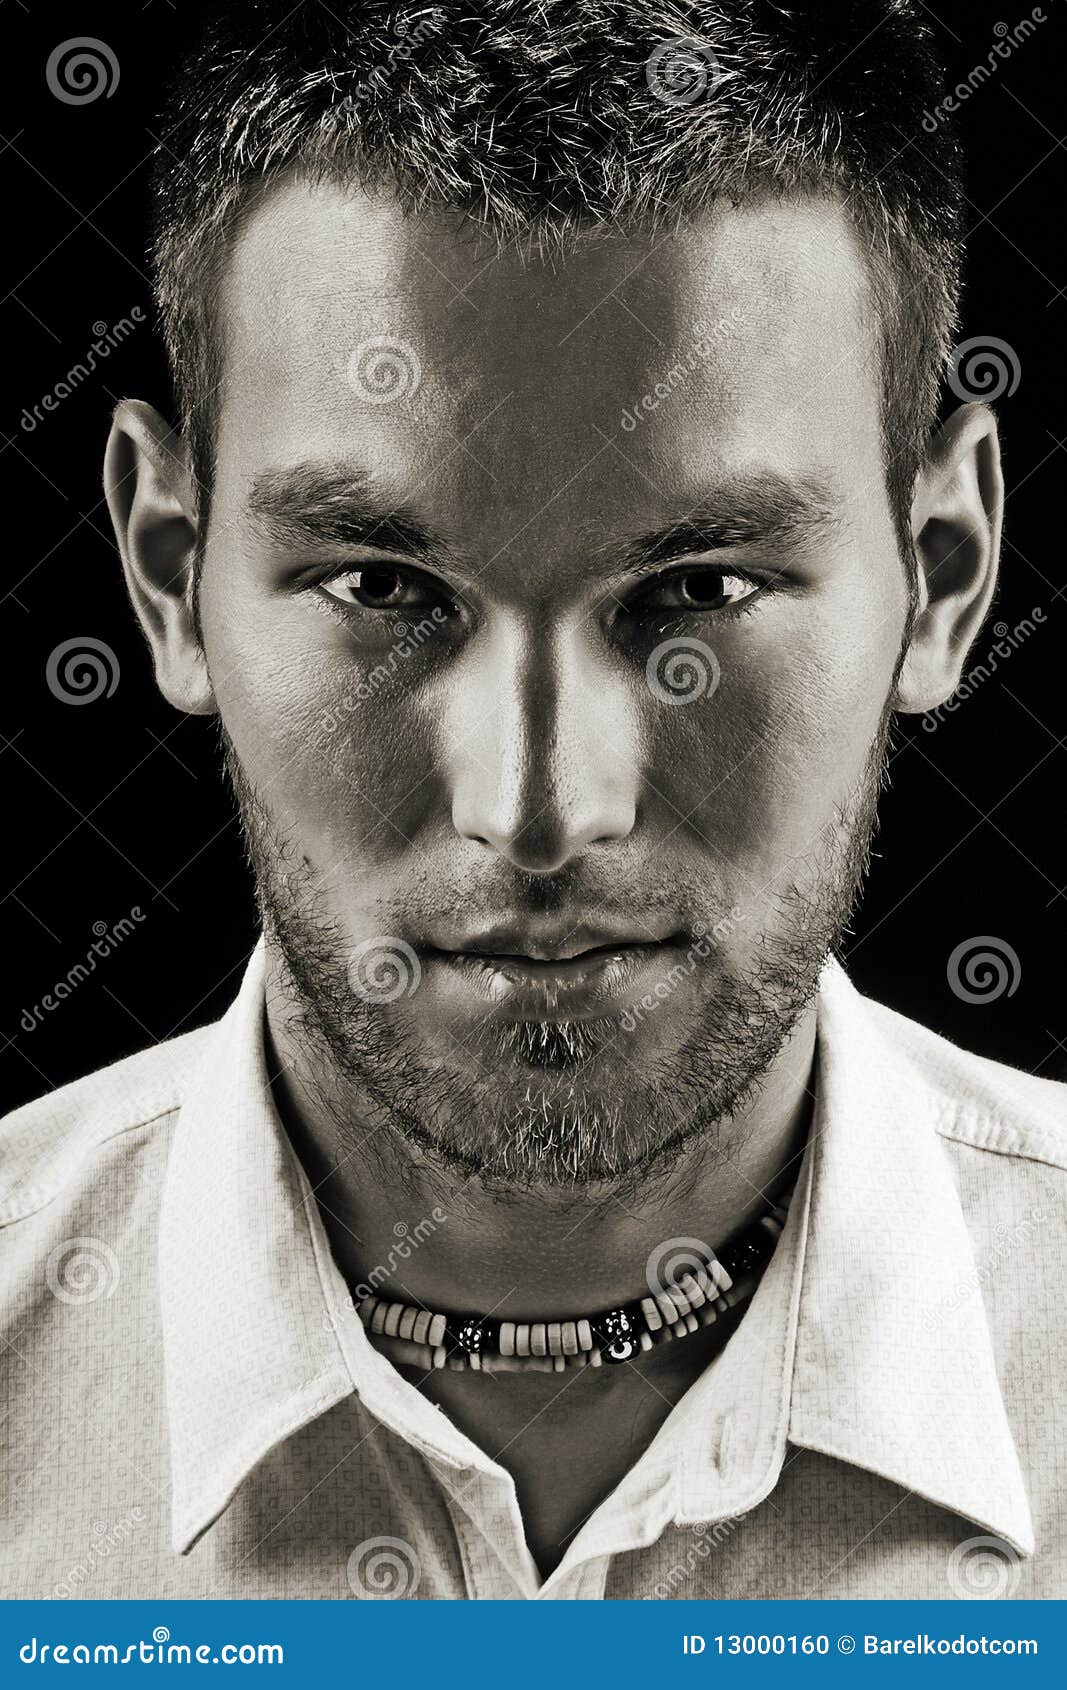 Handsome Young Man Monochrome Portrait Stock Photo - Image of hair ...